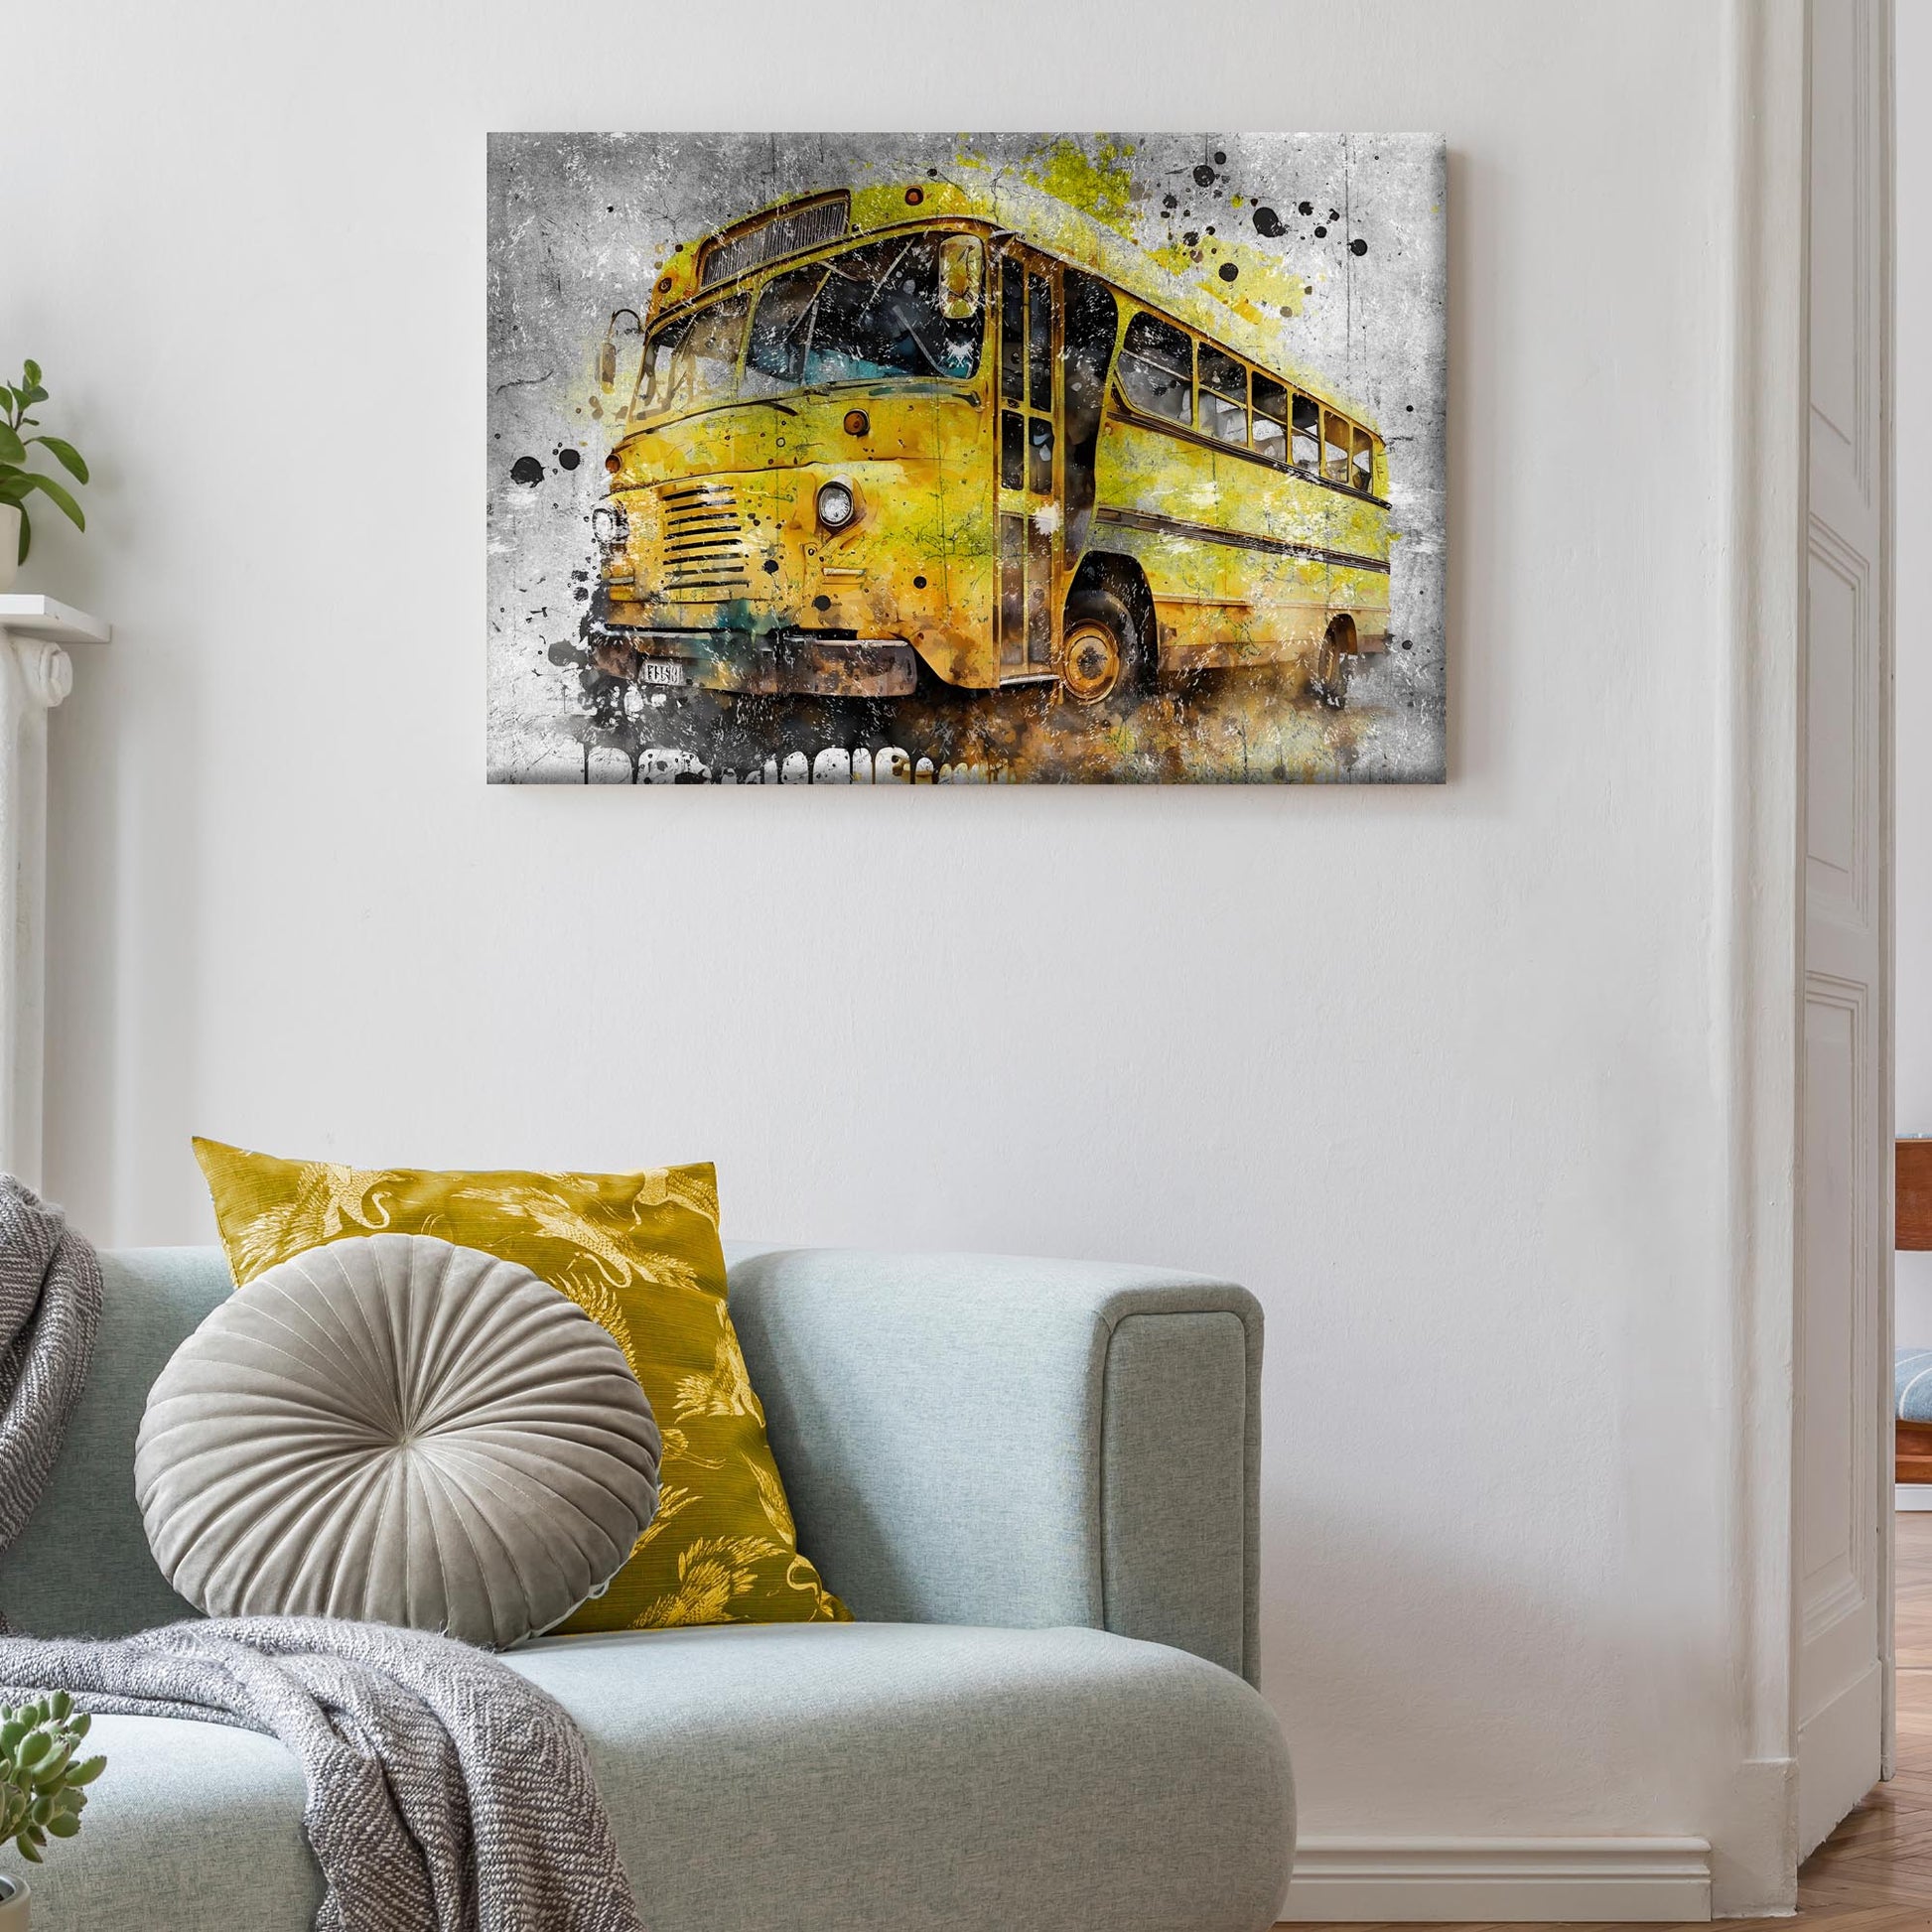 Grunge Expedition  Bus in Grunge Canvas Wall Art